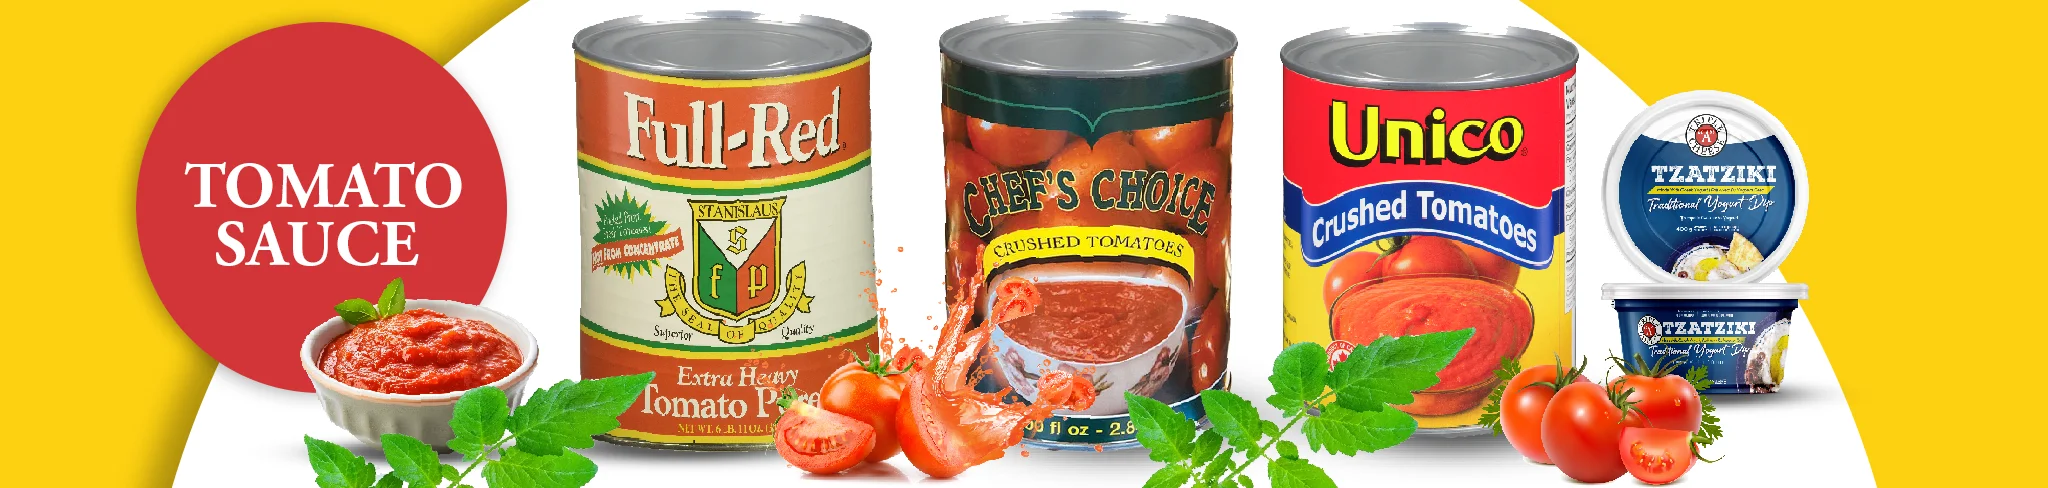 Dairy Max Products - Tomato Sauces